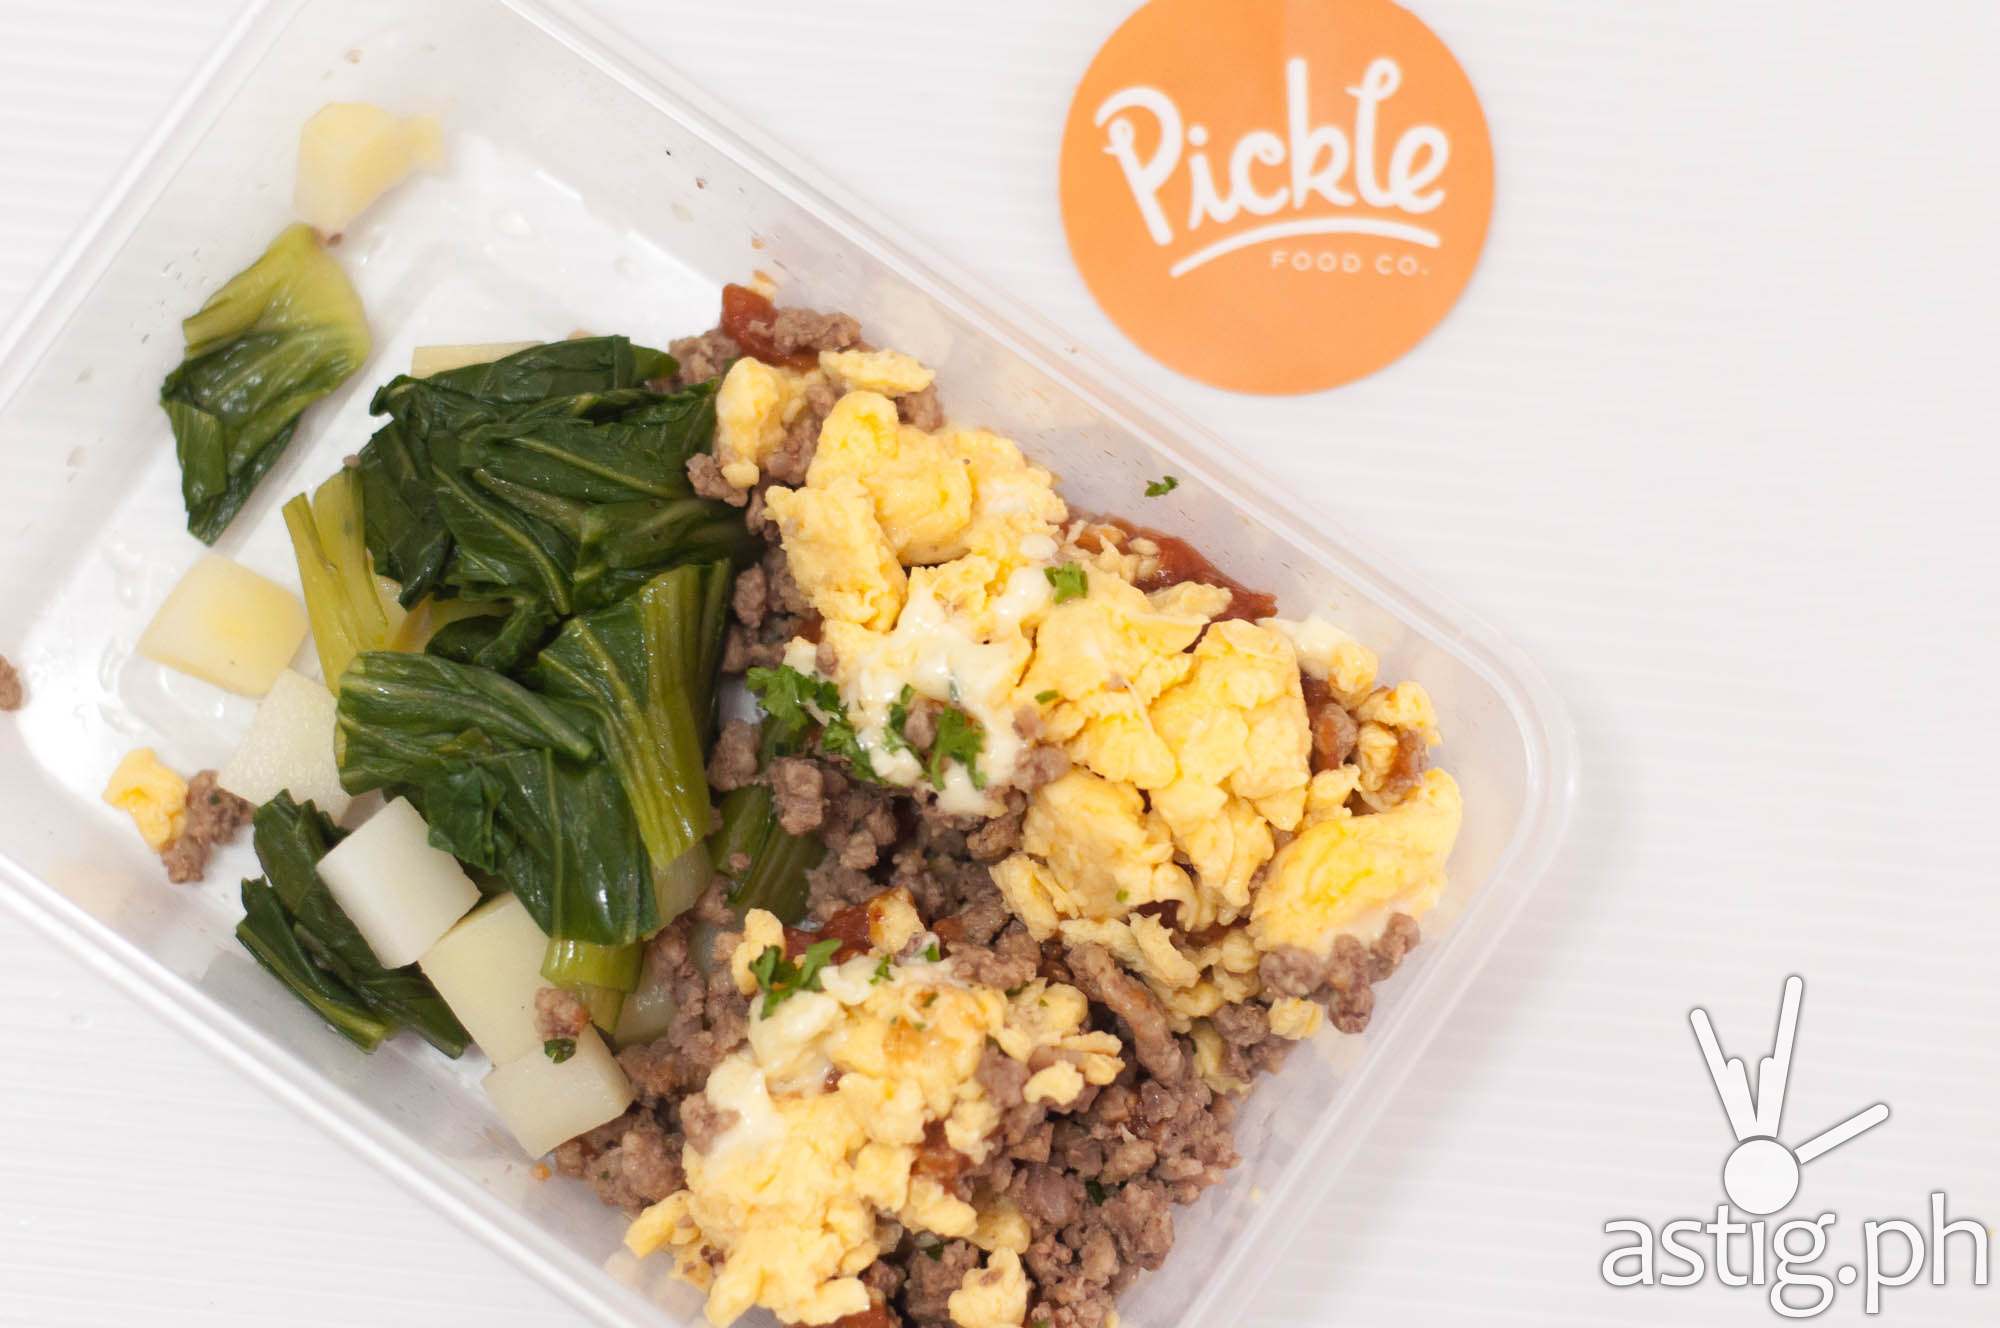 High protein meal from Pickle Philippines